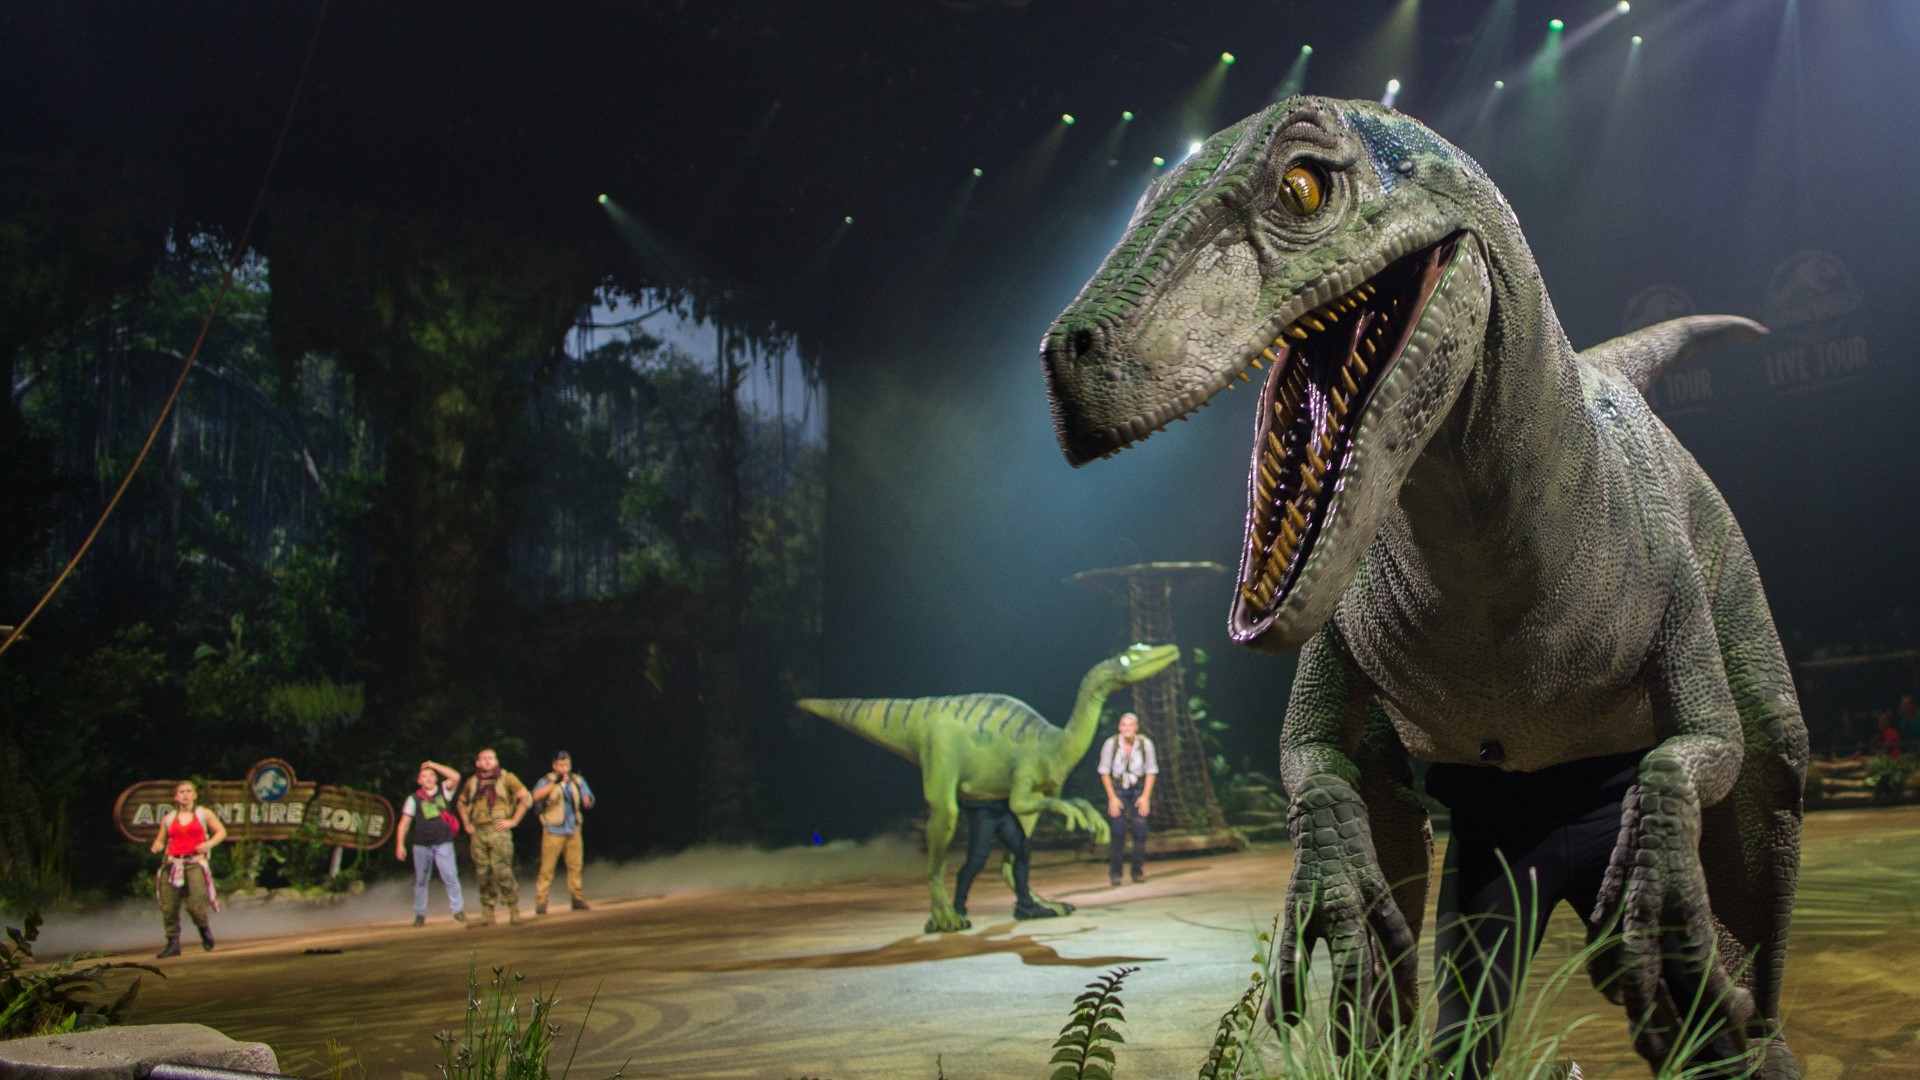 Ticket holders can experience film-accurate, life-sized dinosaurs at the Giant Center from Nov. 25 to 27.